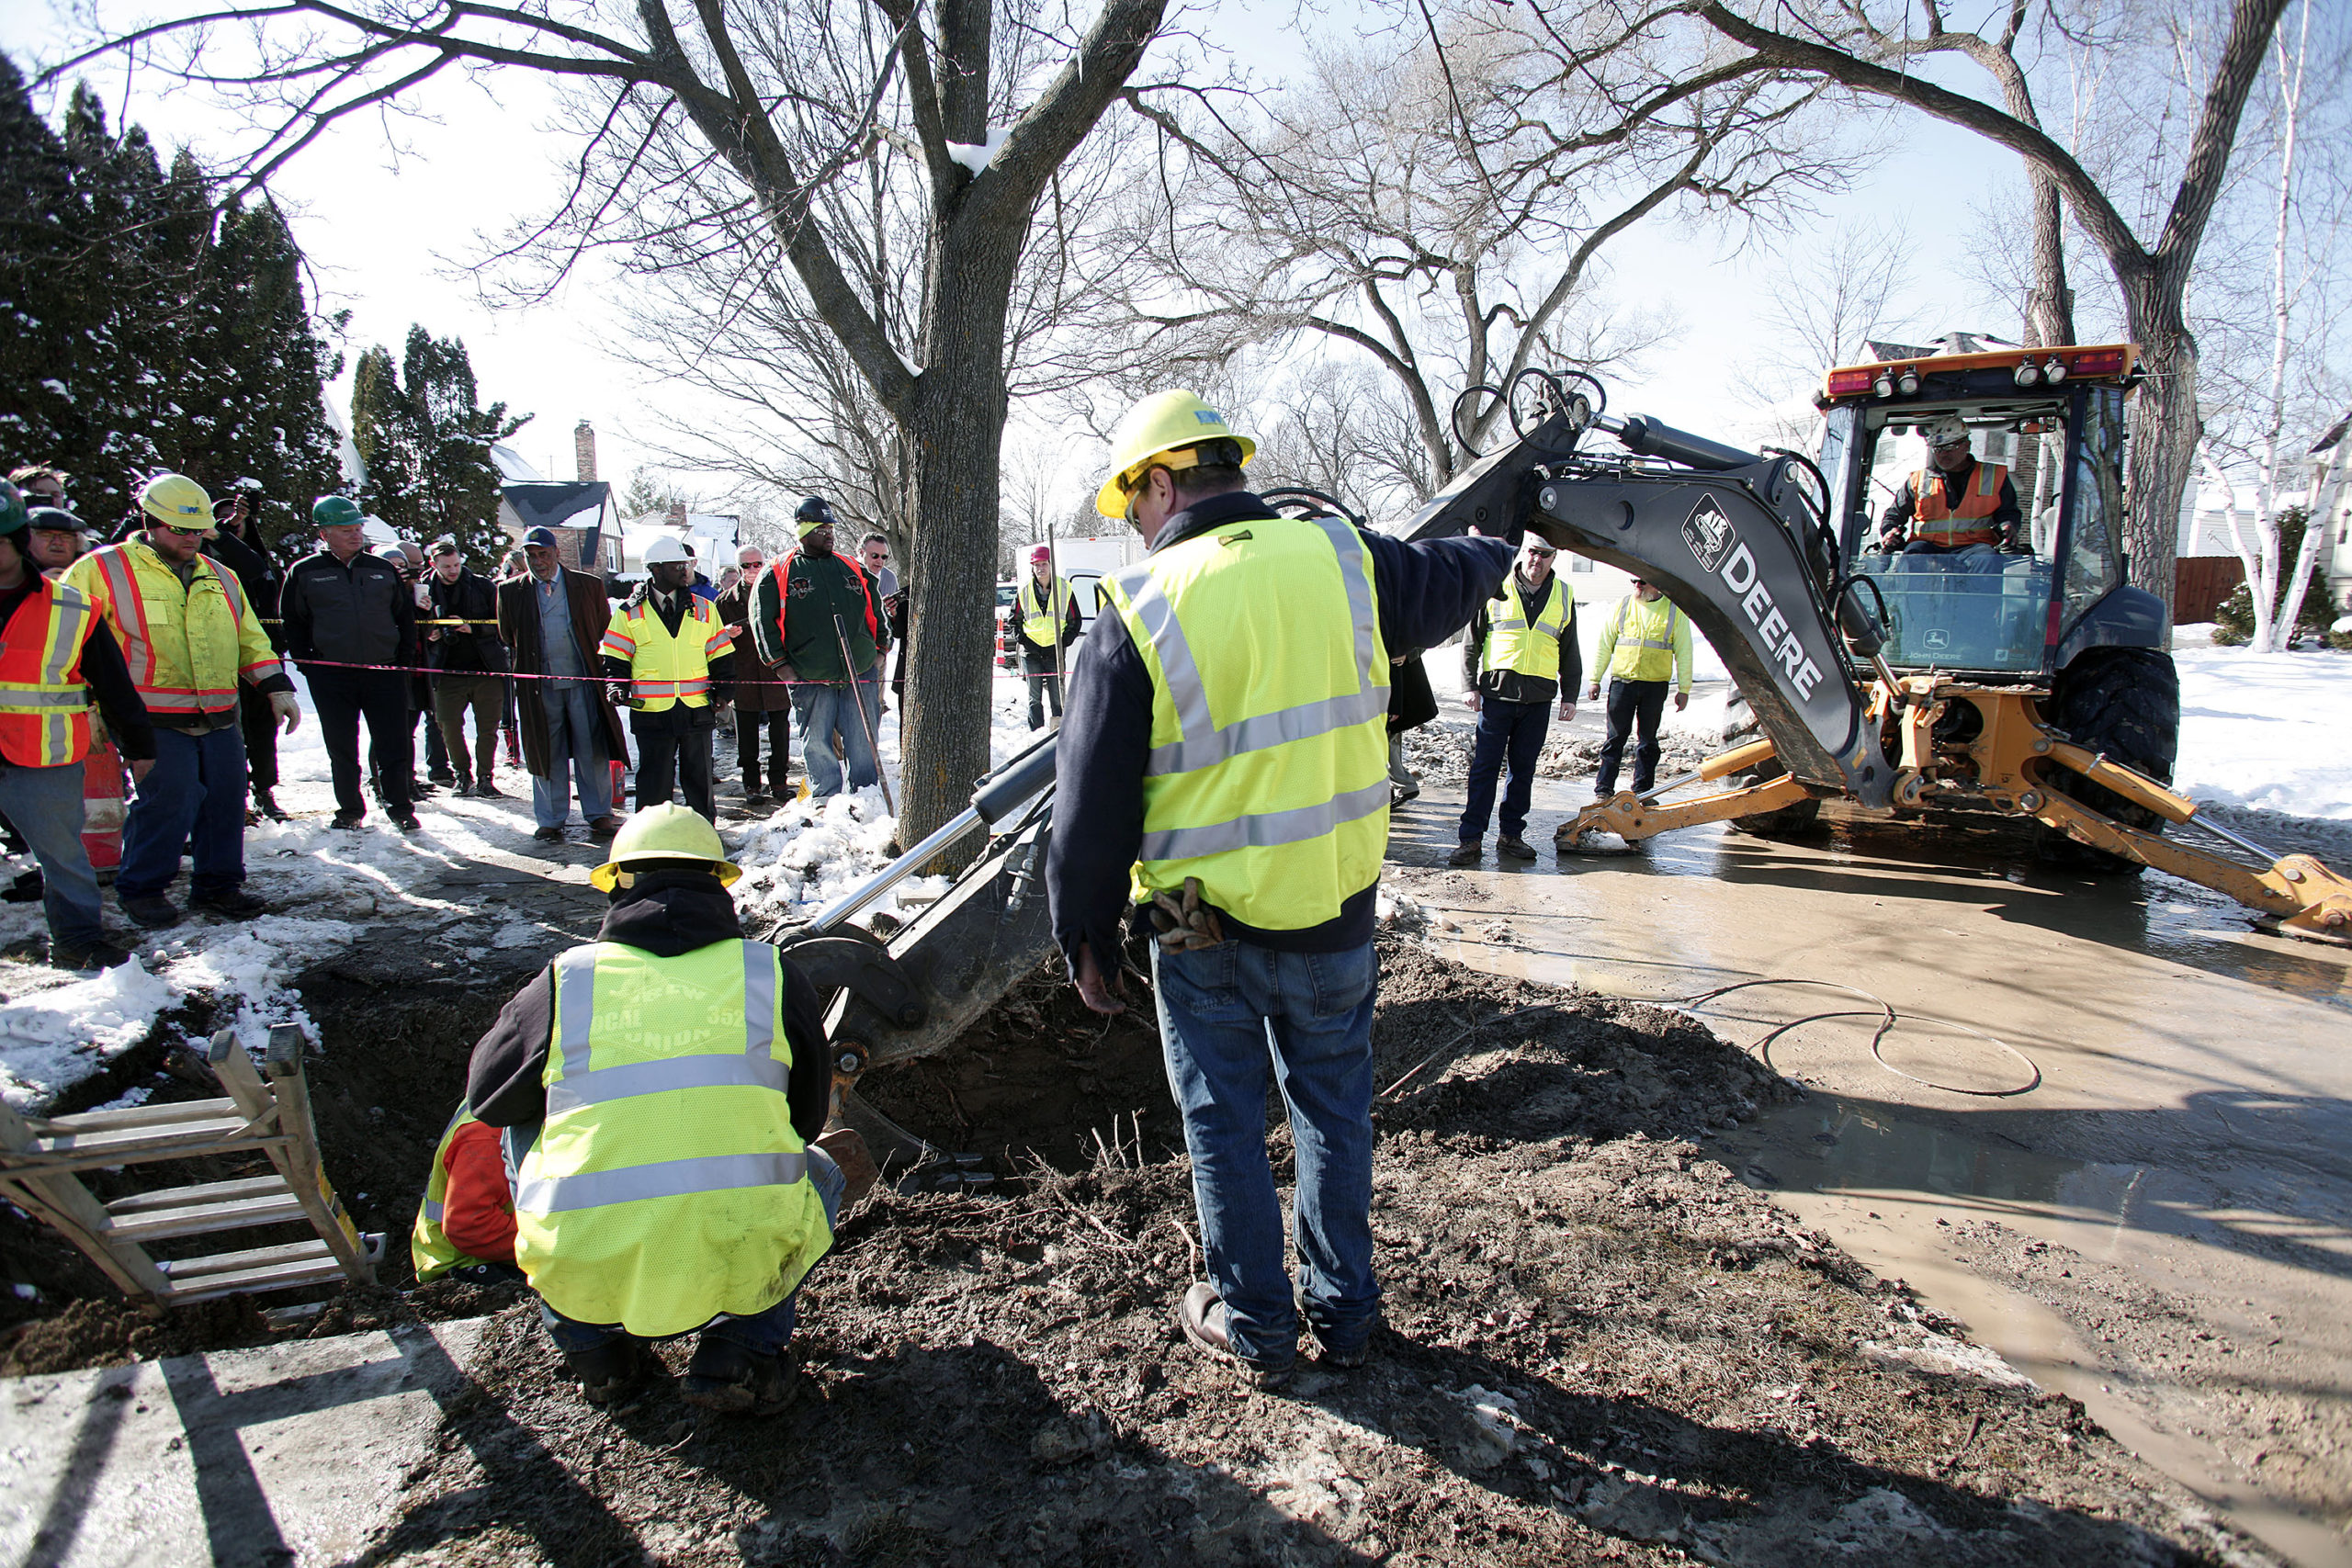 Flint Just Replaced Its First Lead Pipe (Only About 8000 More To Go)